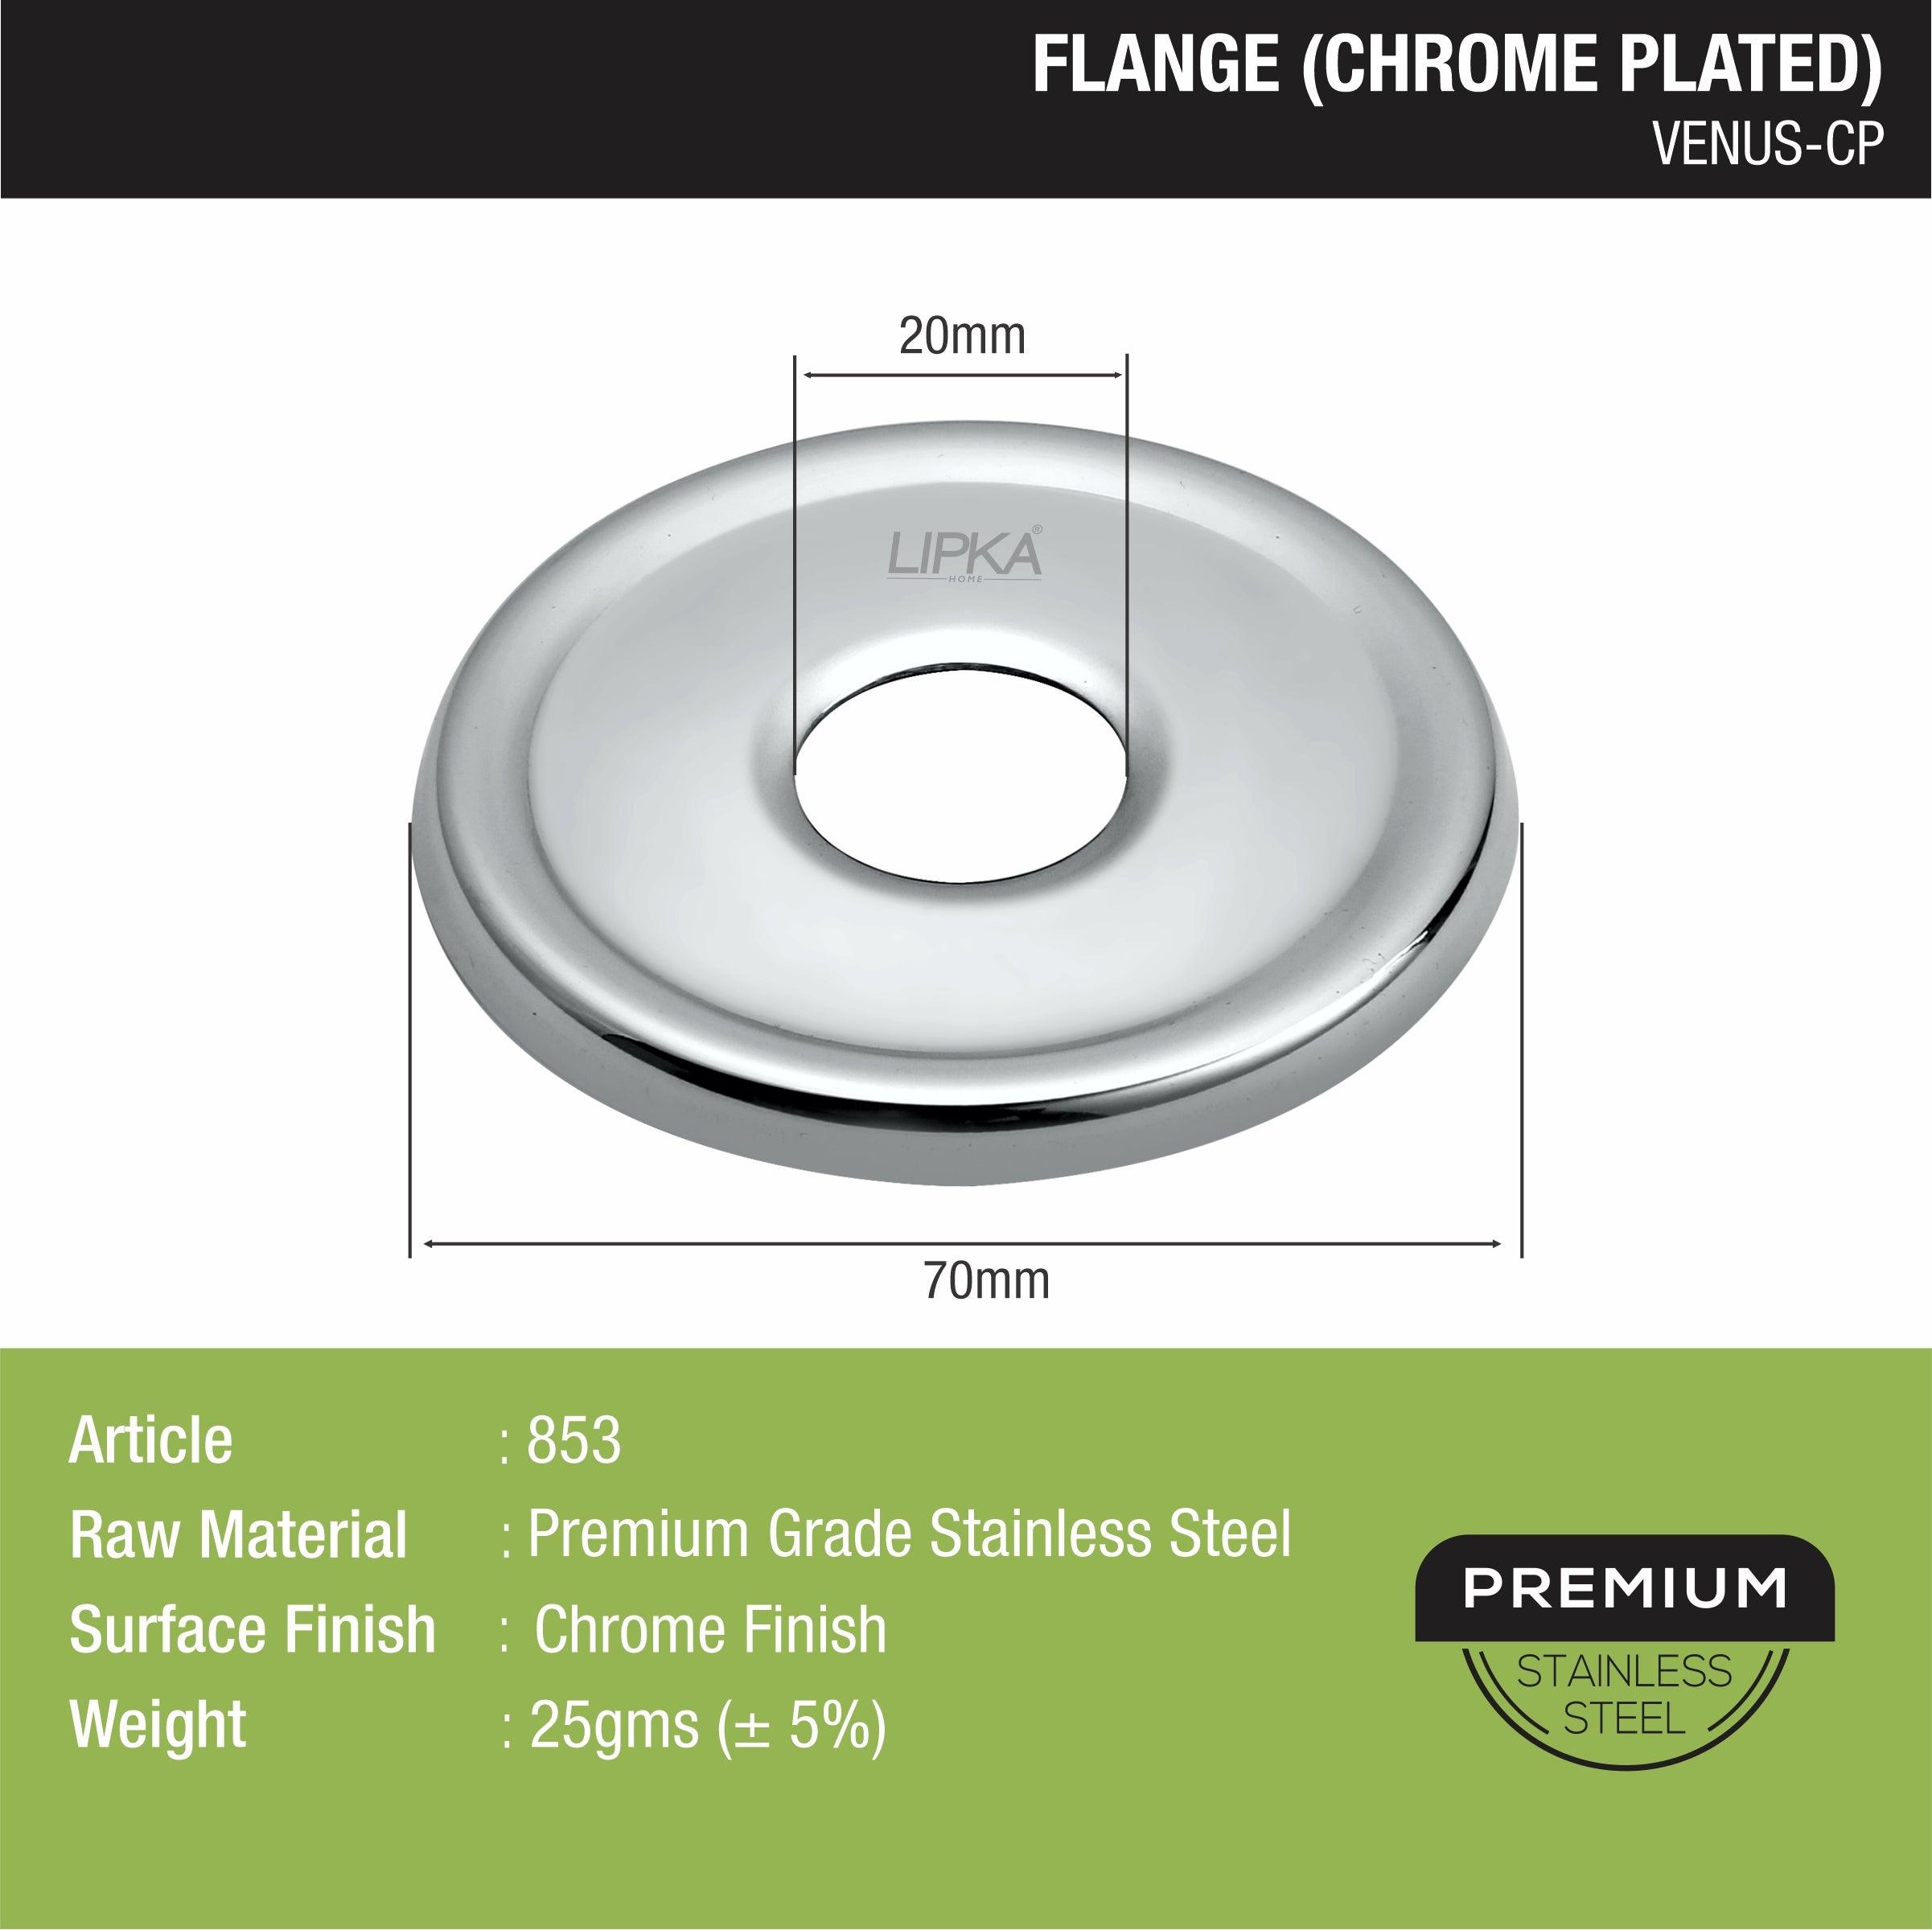 Venus Flange (Chrome Plated) sizes and dimensions